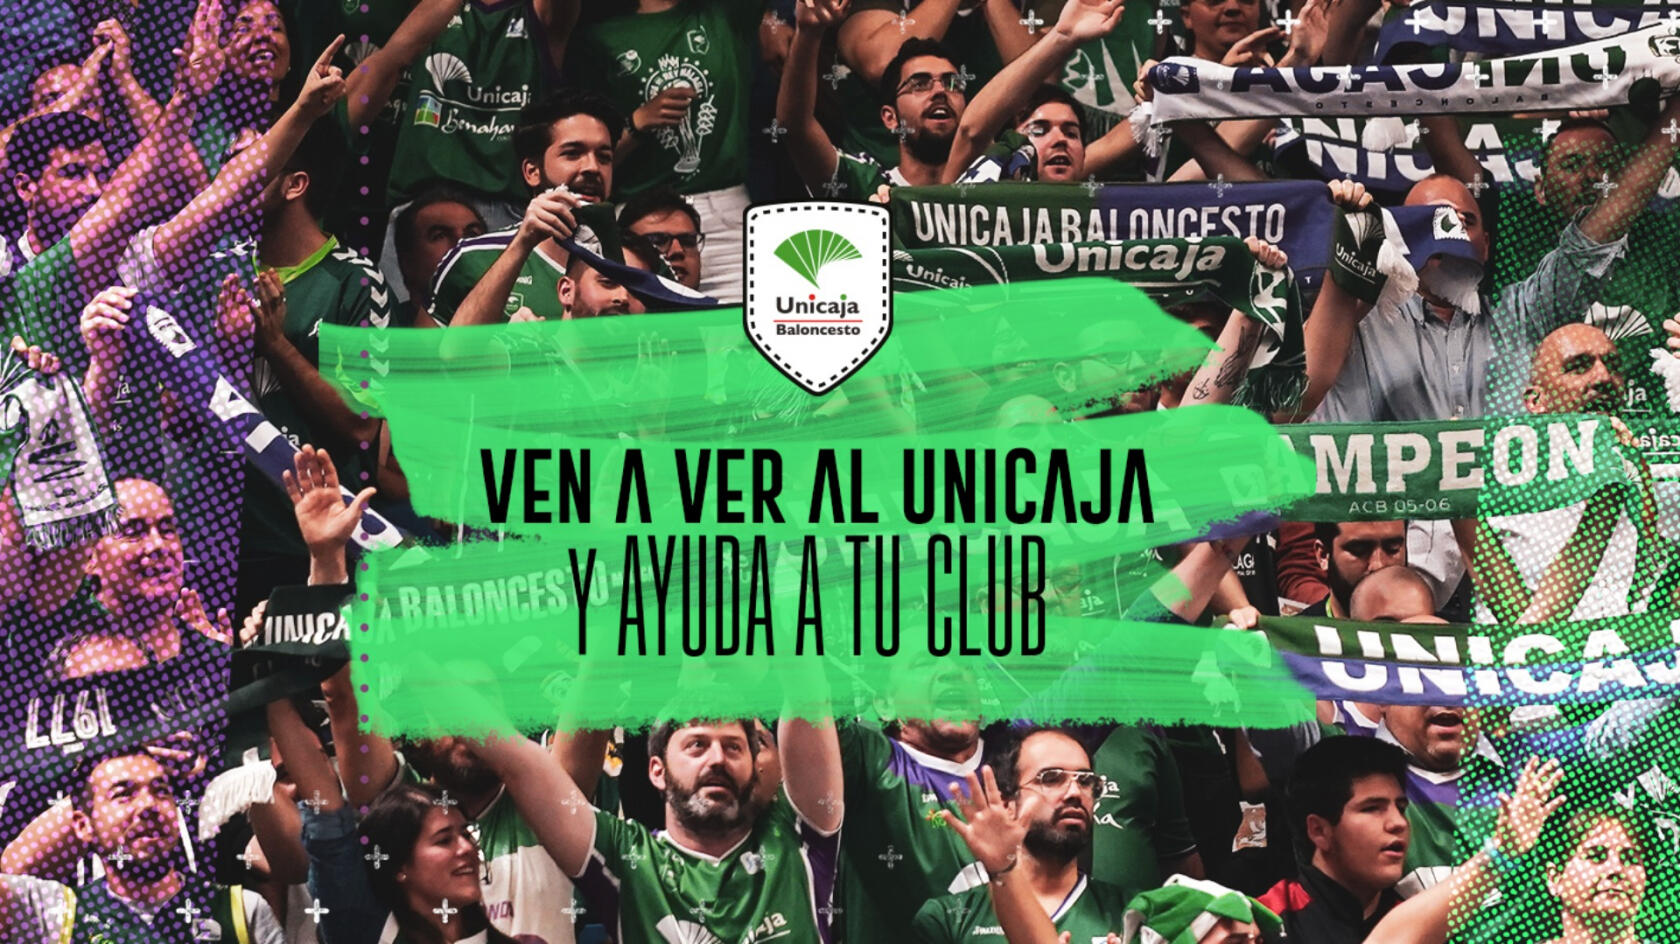 Malaga clubs will be official ticket sales points for Unicaja games